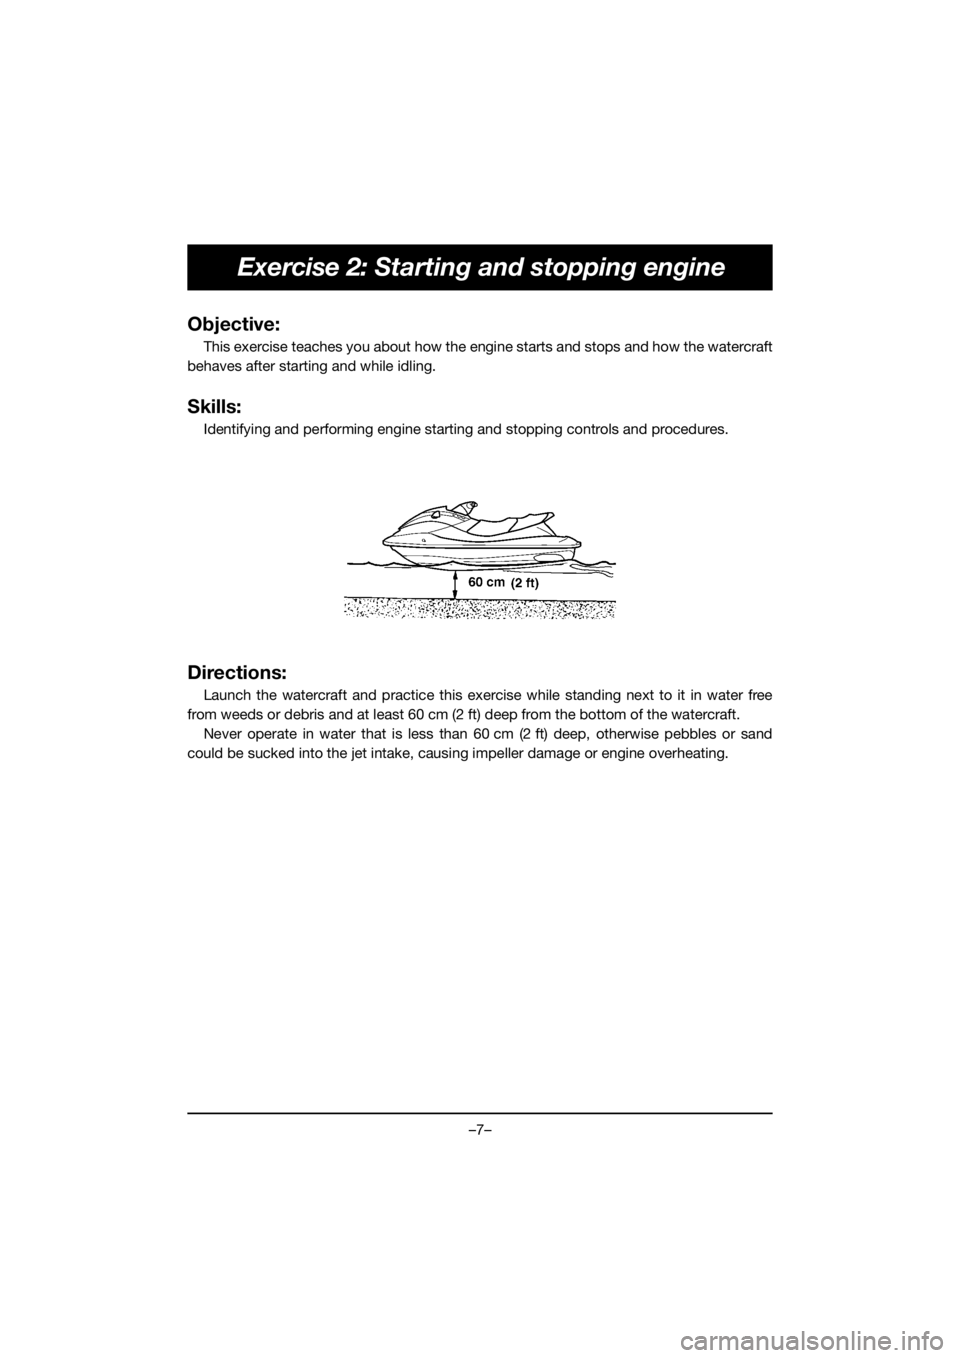 YAMAHA EX SPORT 2020  Owners Manual –7–
Exercise 2: Starting and stopping engine
Objective:
This exercise teaches you about how the engine starts and stops and how the watercraft
behaves after starting and while idling.
Skills:
Iden